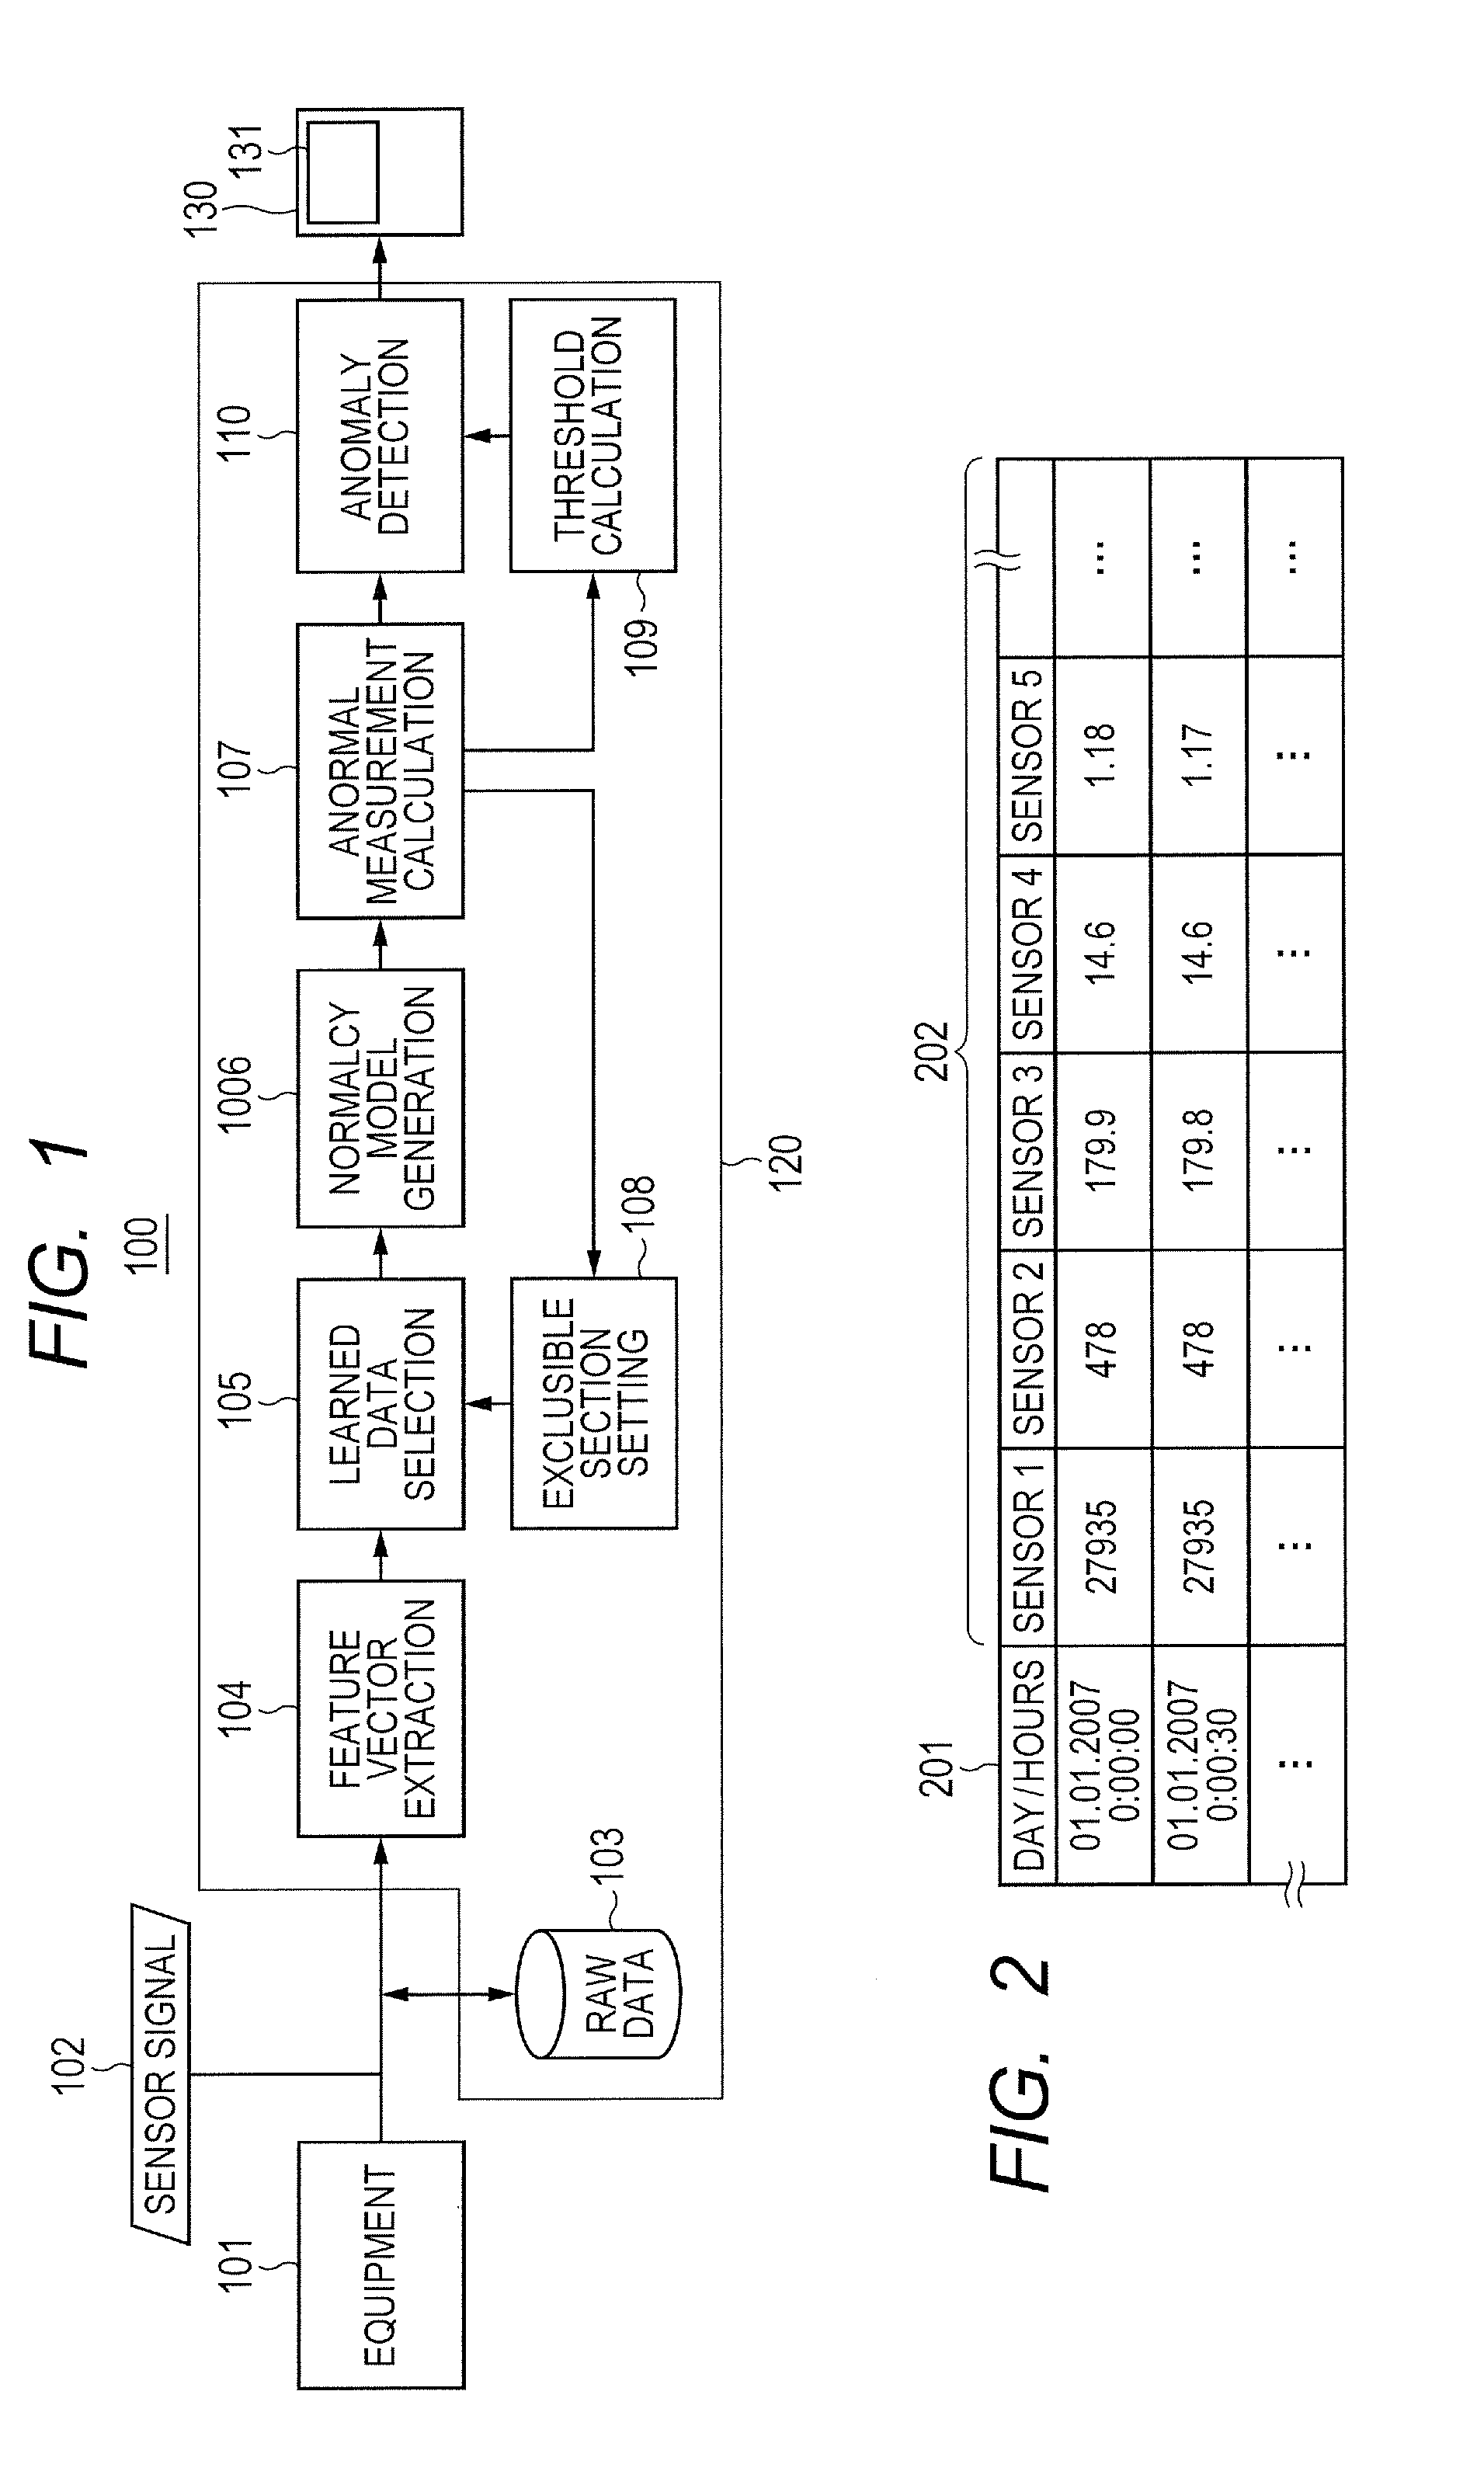 Anomaly detecting method, and apparatus for the same